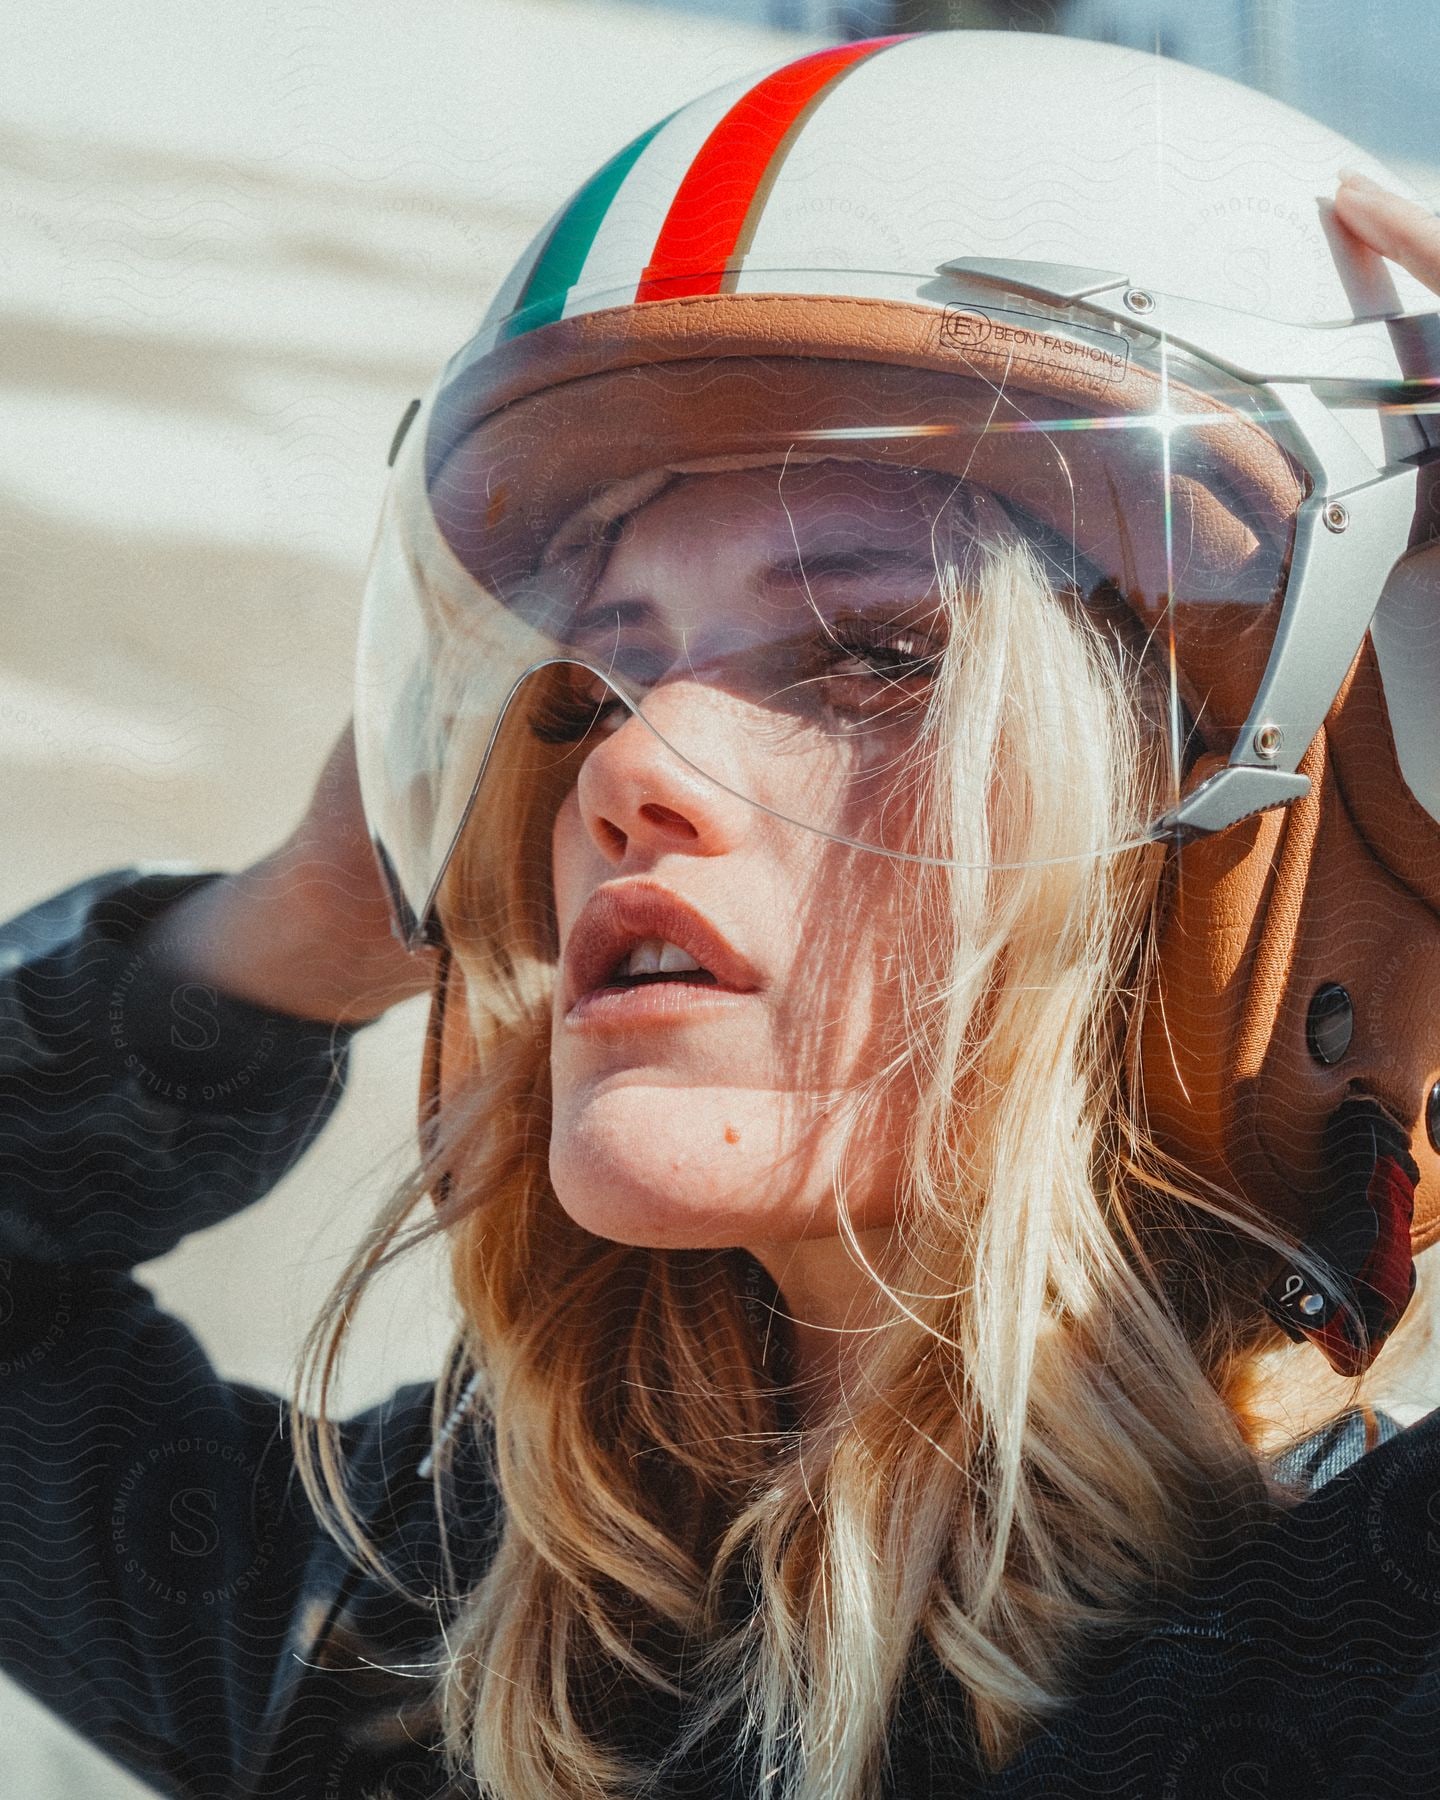 Stock photo of a blonde woman putting on a racing helmet.